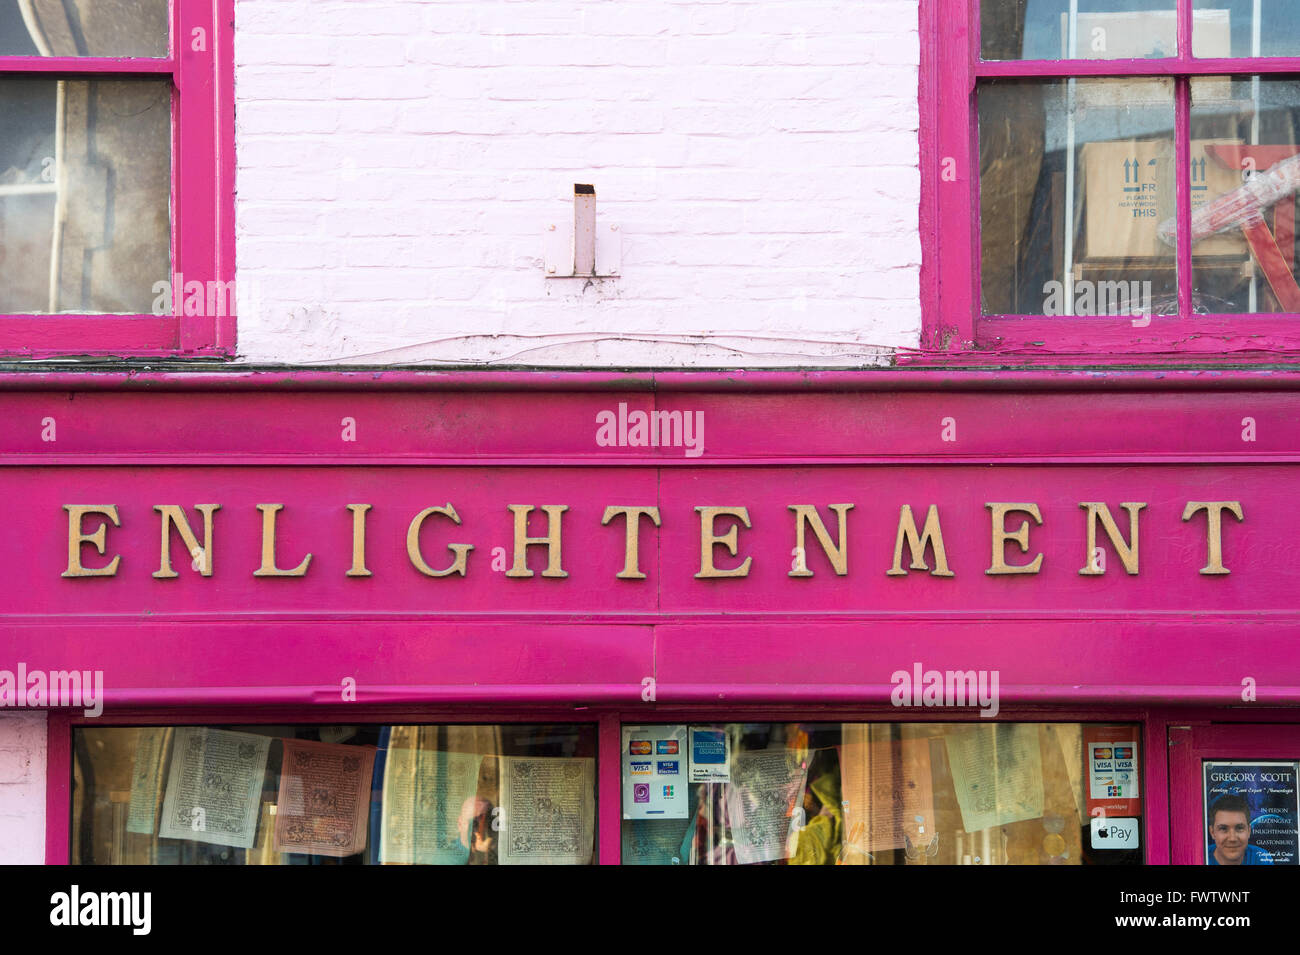 Enlightenment shop front in the high street. Glastonbury, Somerset, England Stock Photo